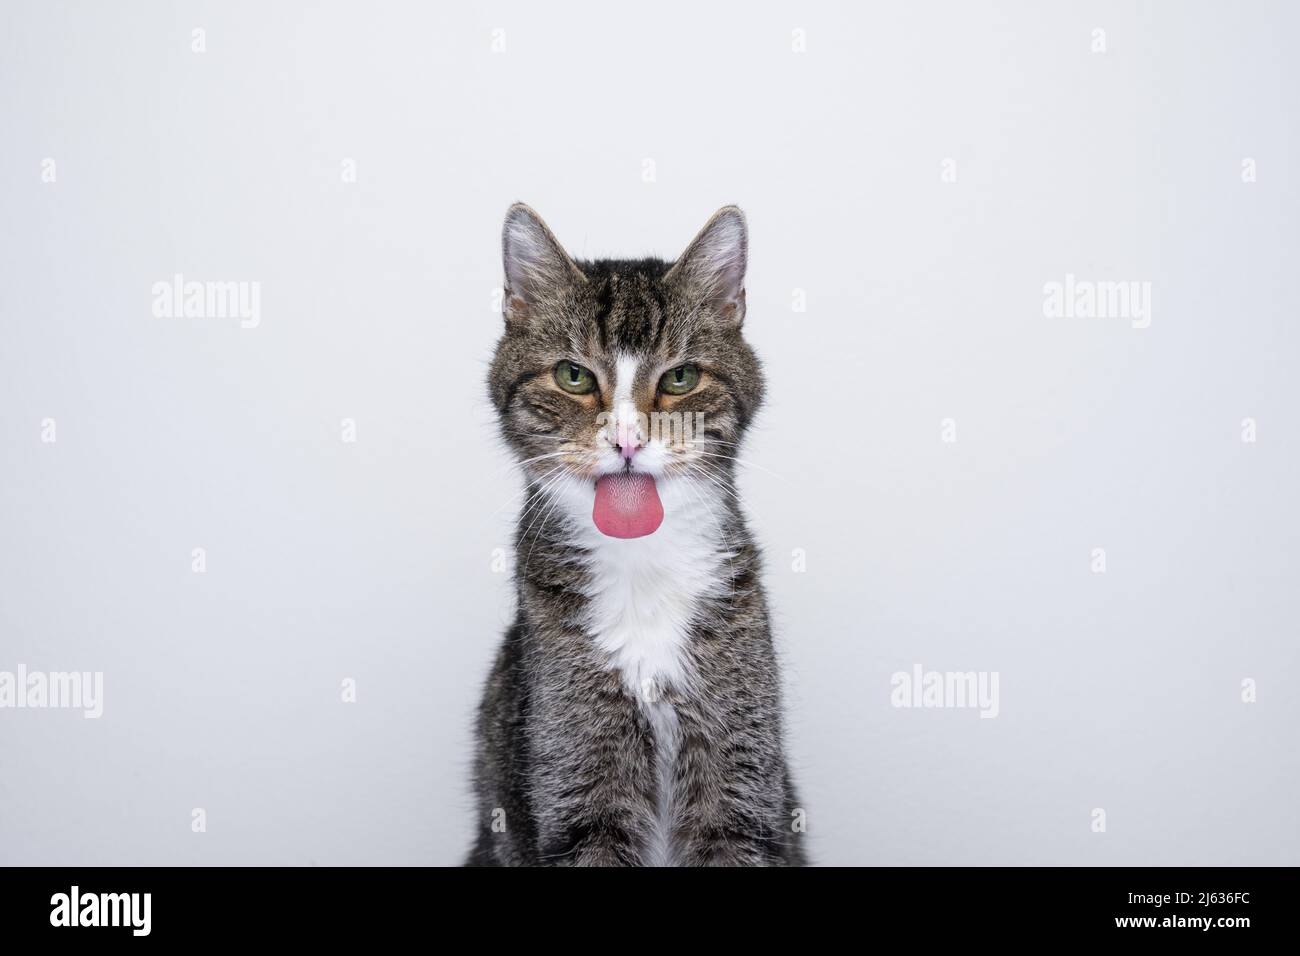 naughty old cat sticking out tongue on white background with copy space Stock Photo